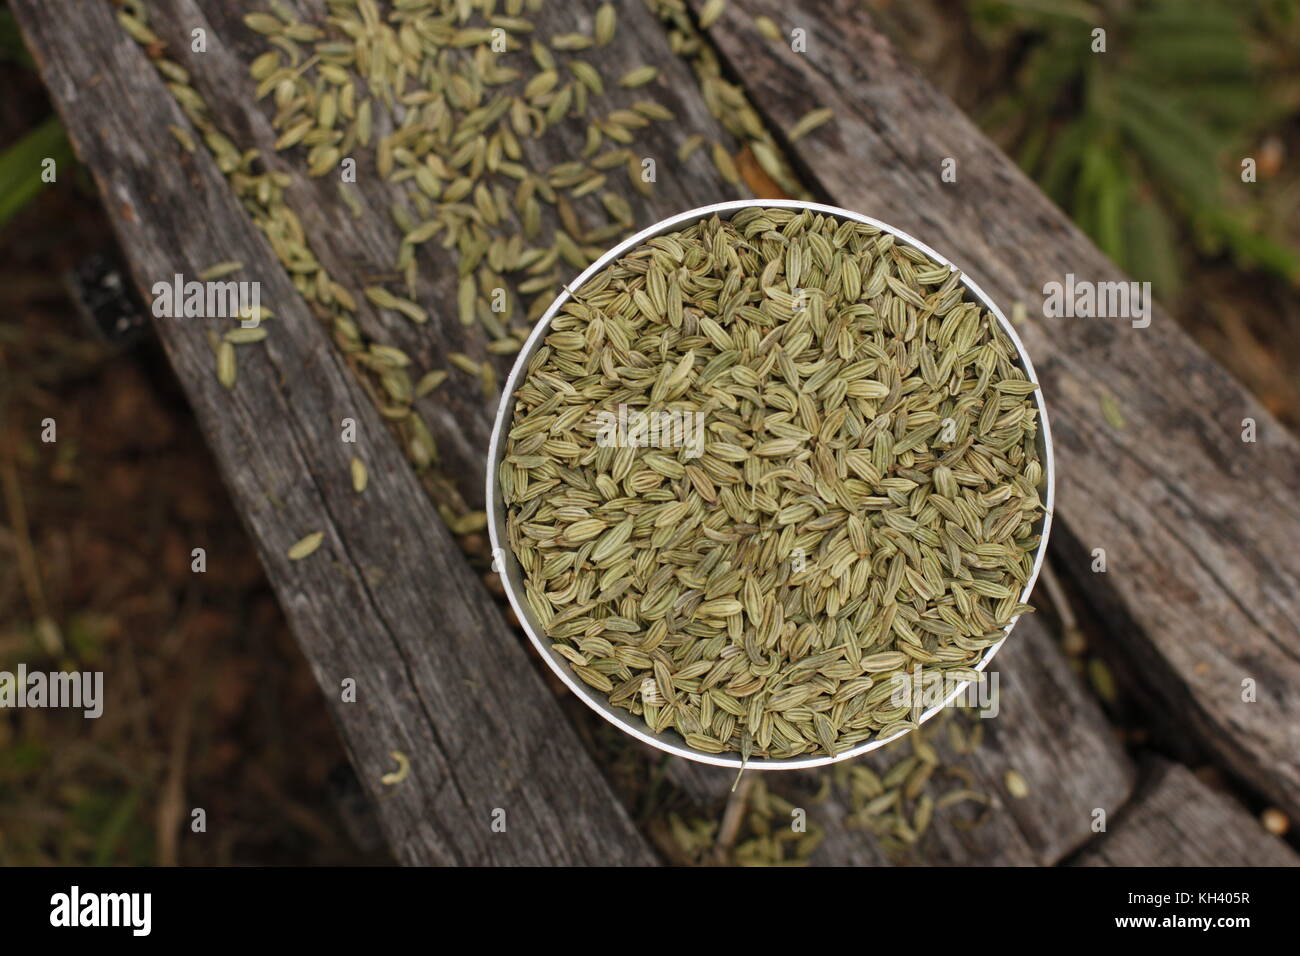 Whole green fennel seeds in metal bowl on rustic background Stock Photo